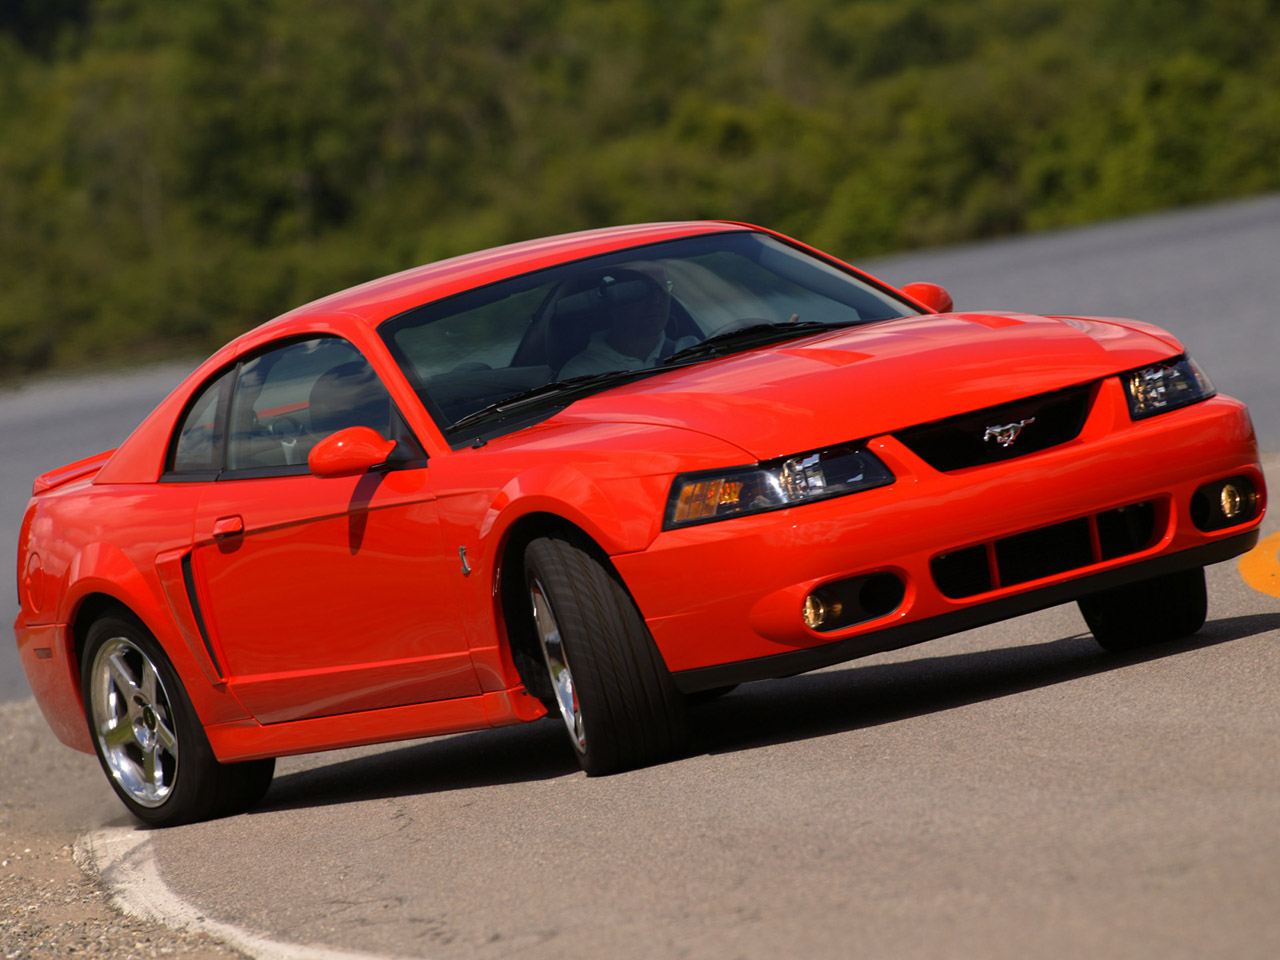 Free Download 2004 Ford Svt Mustang Cobra Angle Turn 1280x960 Wallpaper 1280x960 For Your Desktop Mobile Tablet Explore 46 Mustang Cobra Wallpaper Mustang Gt500 Wallpaper Mustang Gt Wallpaper Mustang